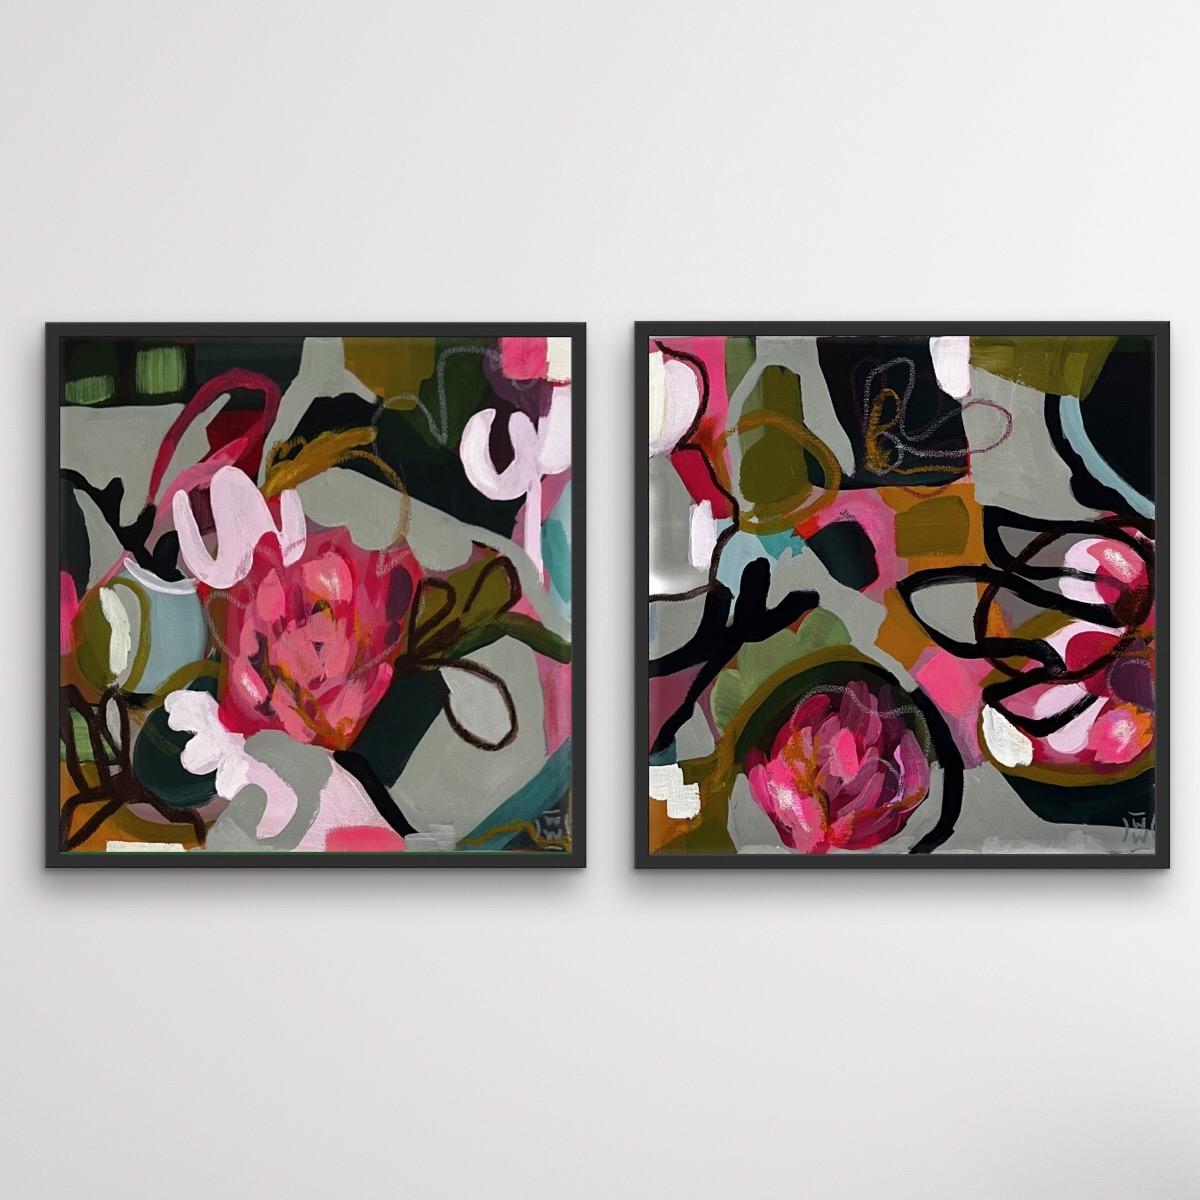 Wendi Weller Landscape Painting - Beatrice, Portia, Diptych, original landscape painting, floral art, abstract